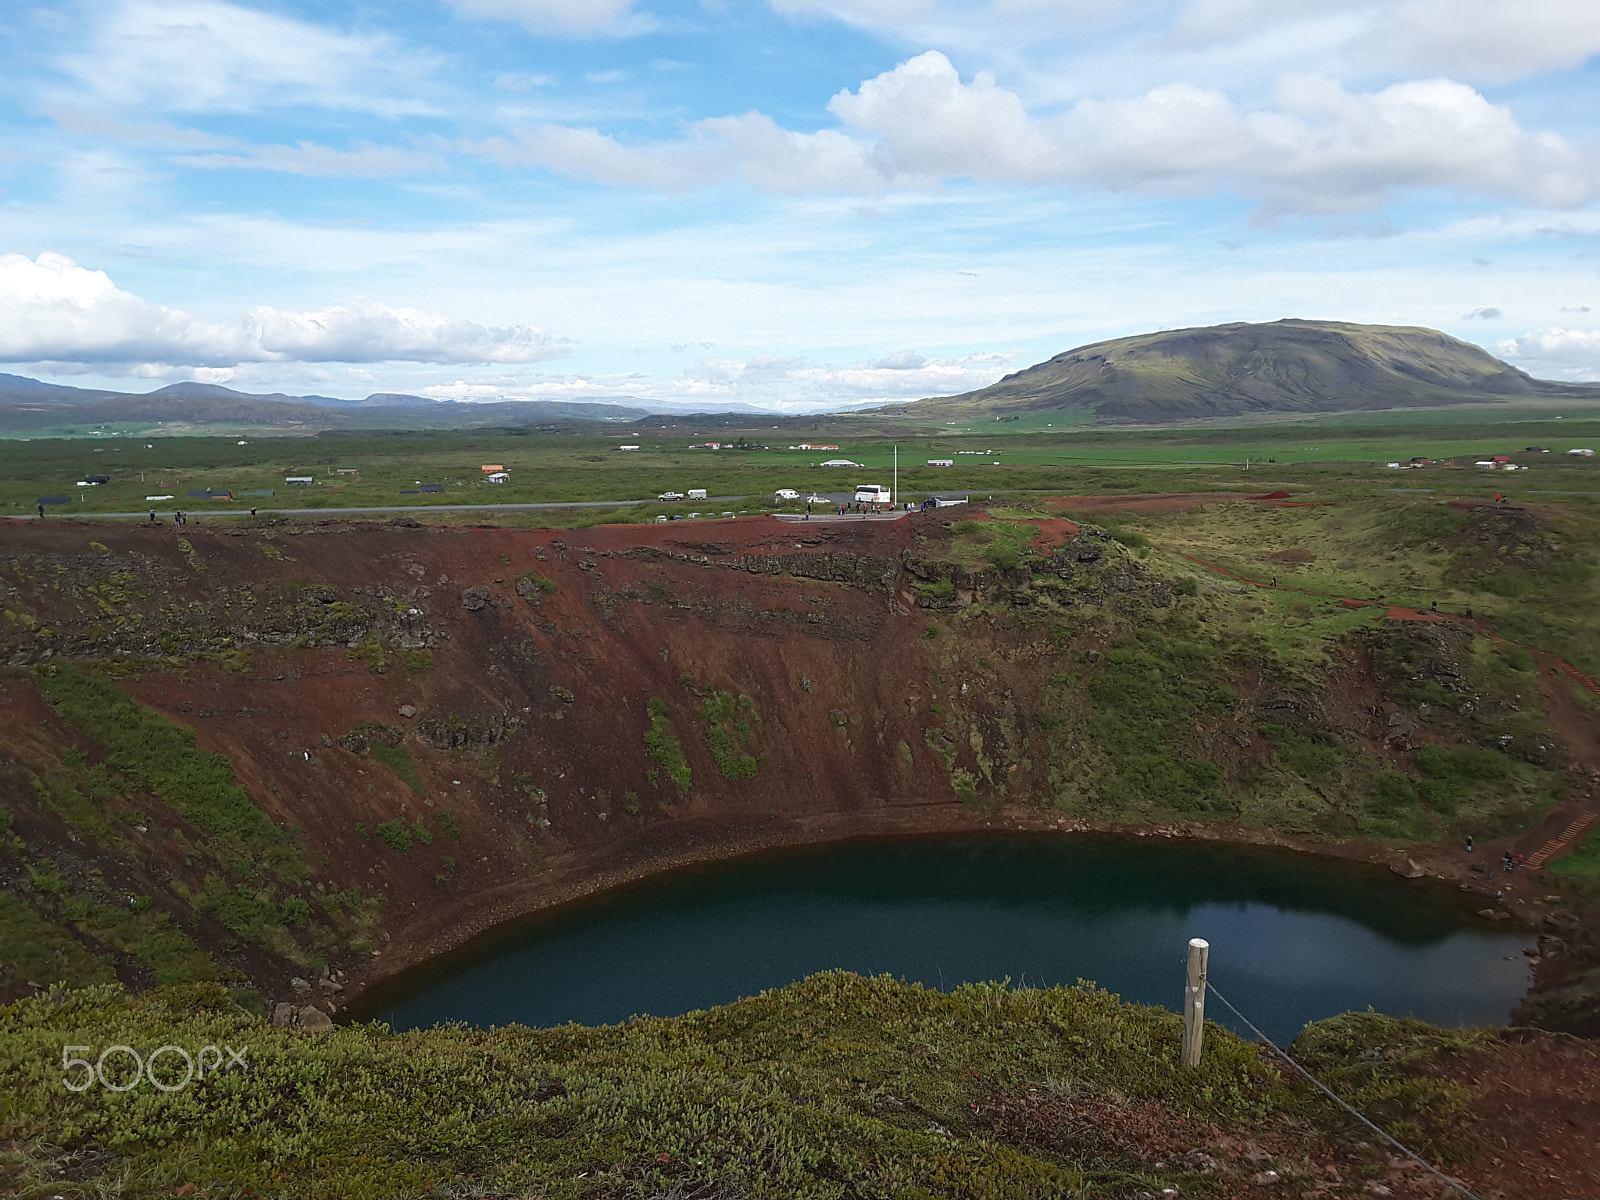 Samsung Galaxy Tab S2 8.0 sample photo. Kerid crater and landscape, iceland photography